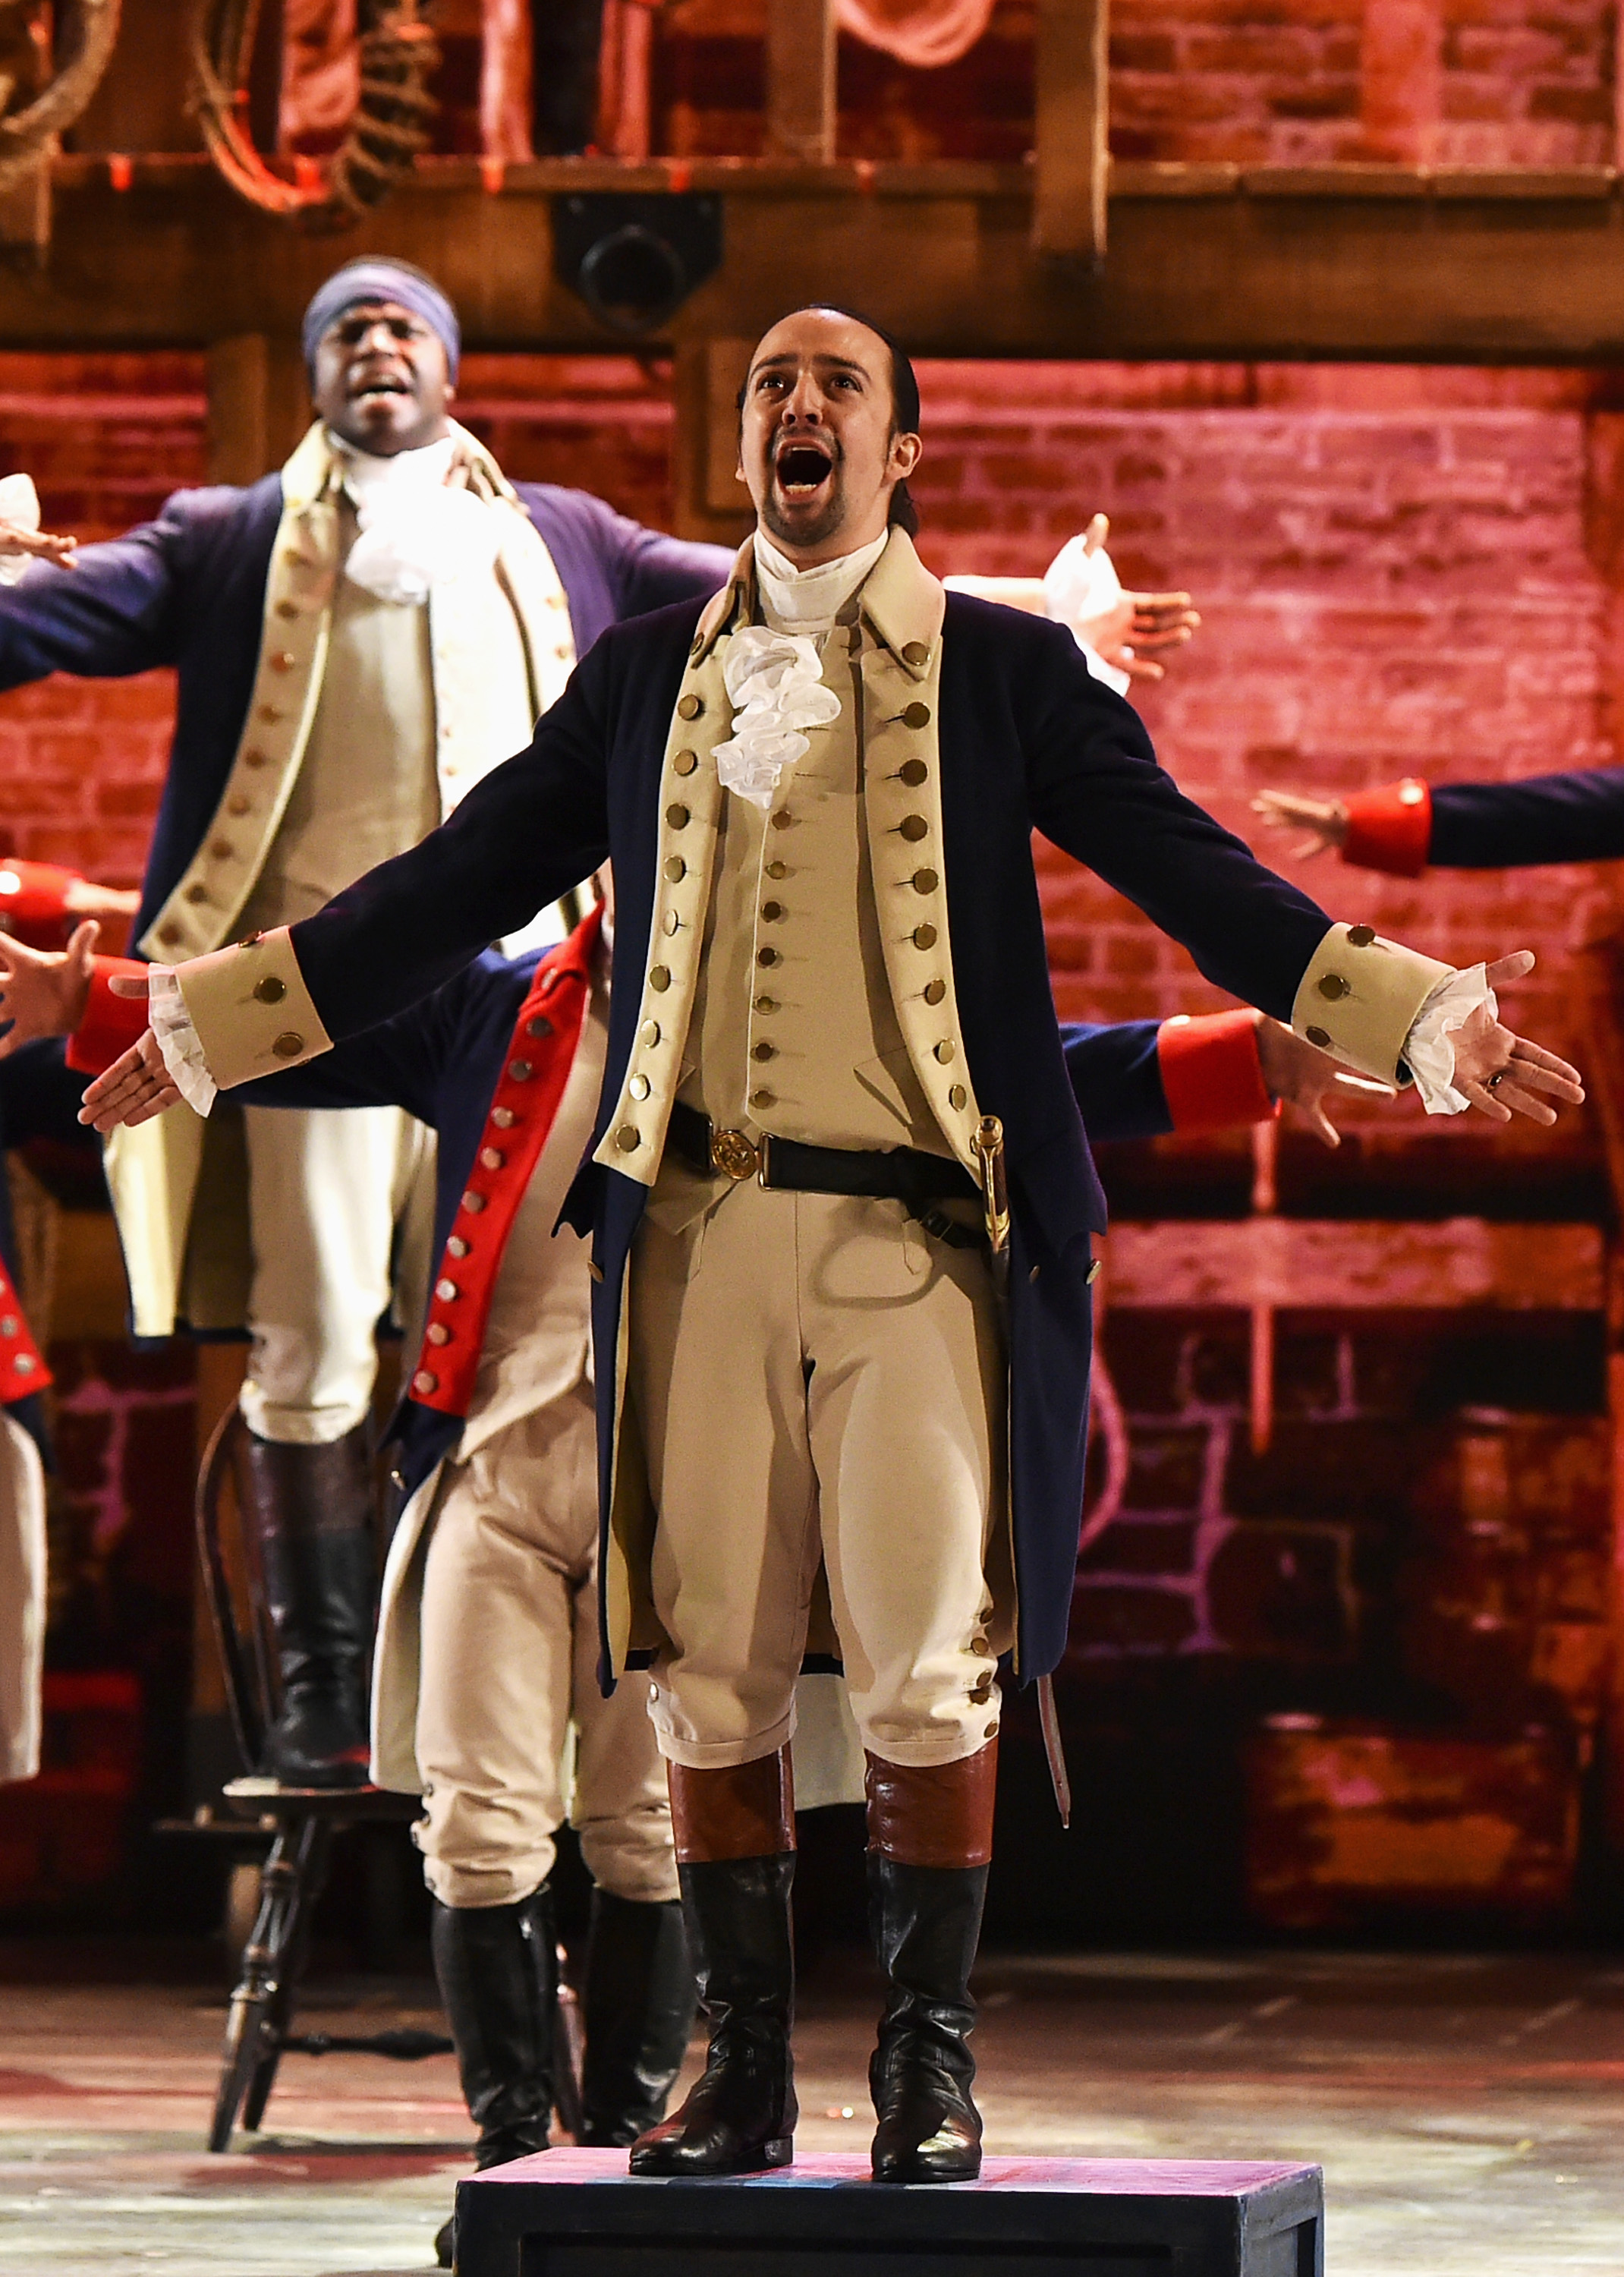 A Hamilton Film With The Original Broadway Cast Is Coming To Tell His Story To A Wider Audience 